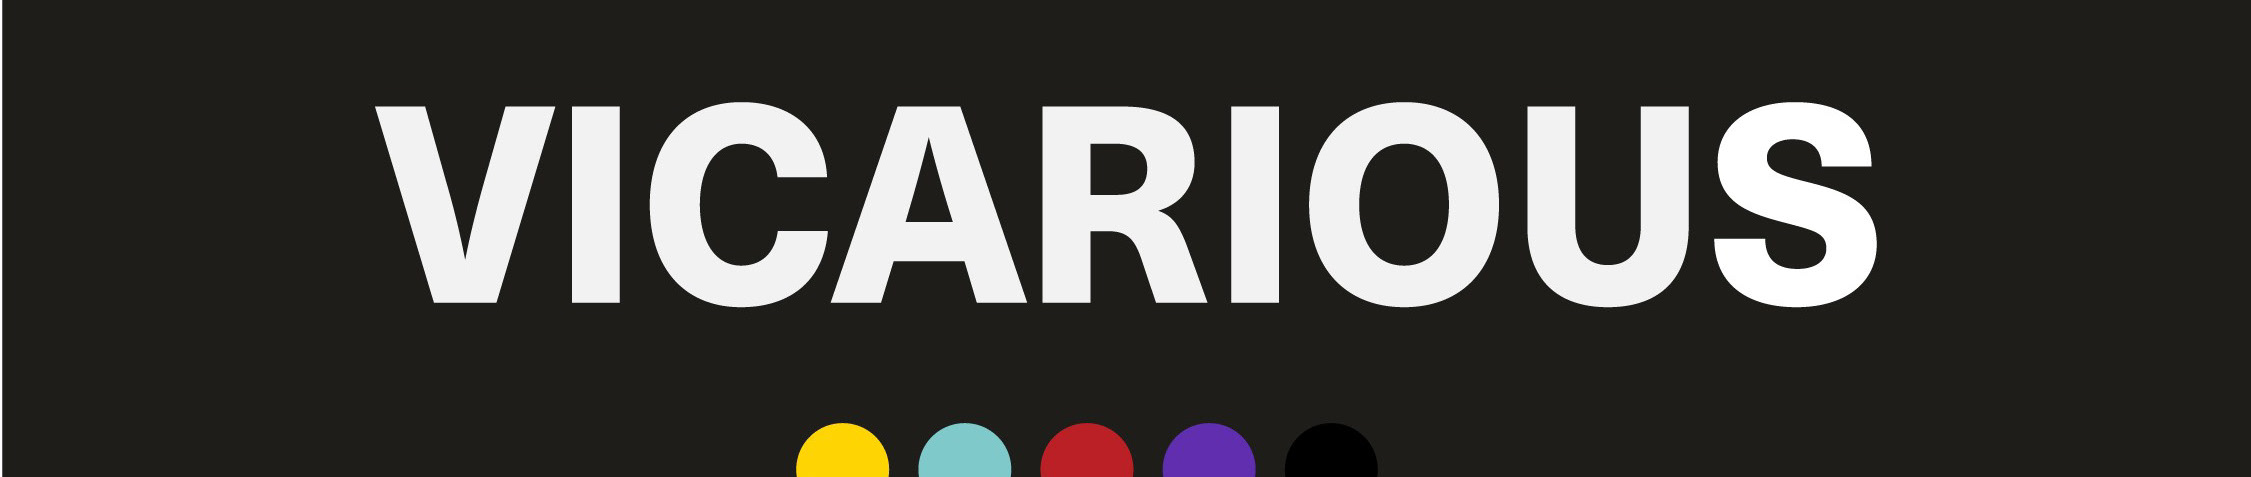 VICARIOUS AGENCY's profile banner